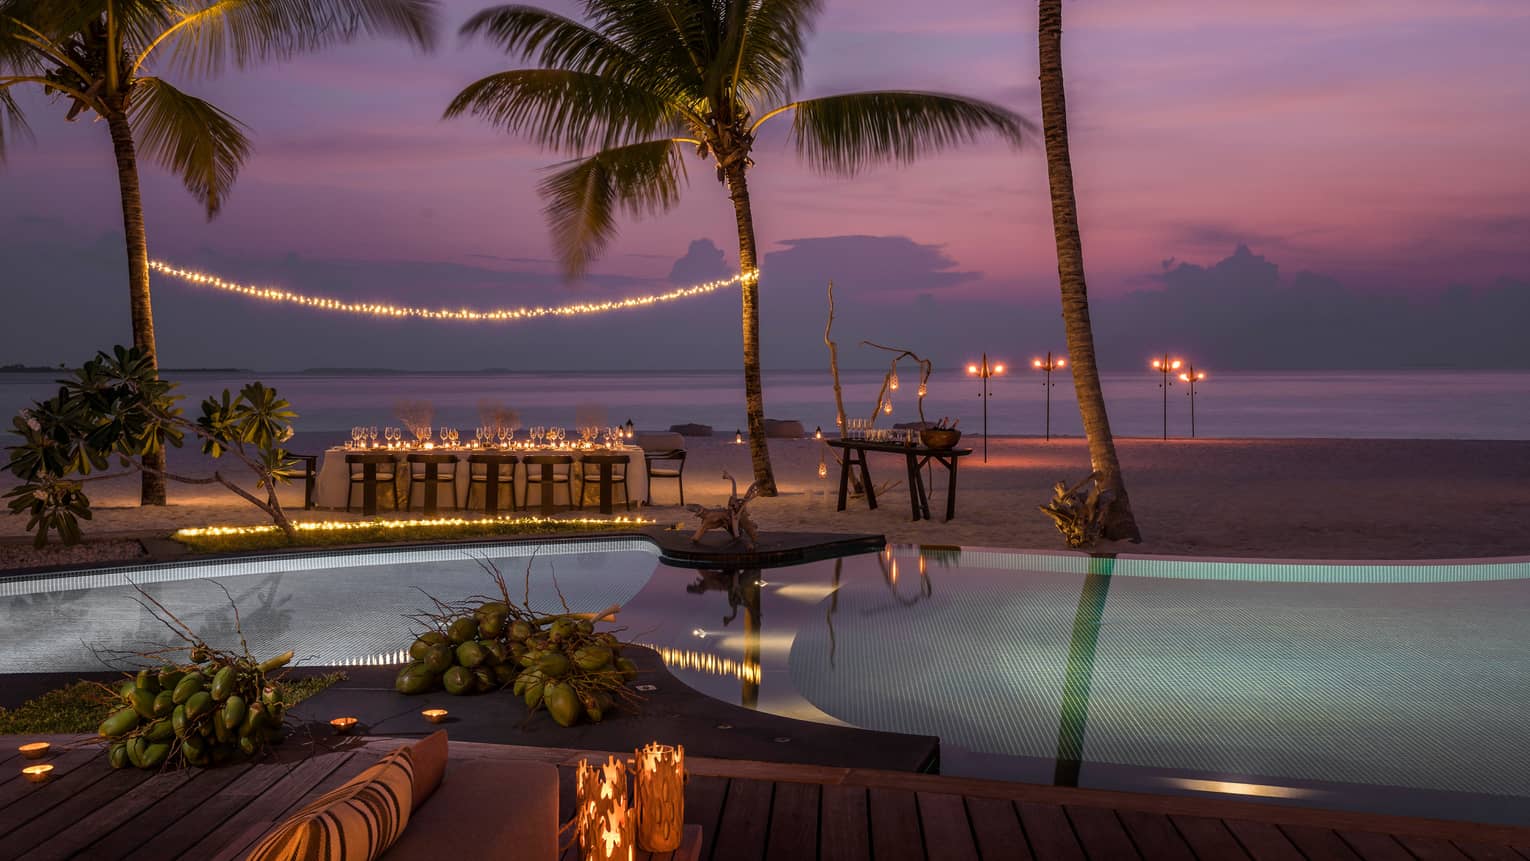 String of lights between palm tree over private dining table on beach by swimming pool at sunset